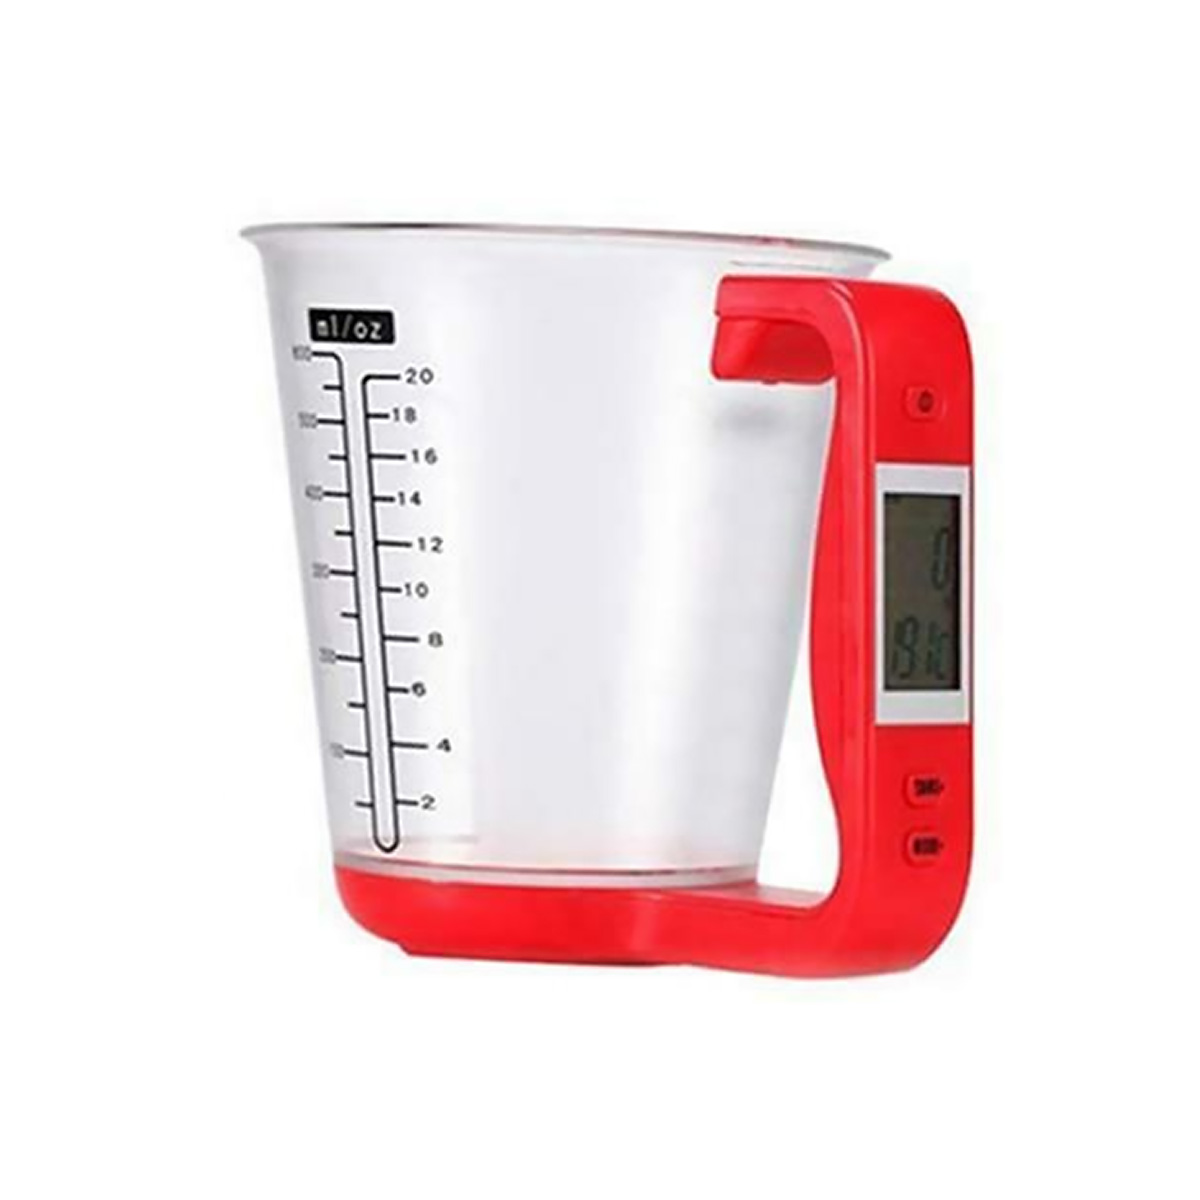 Electronic-Scale-Measuring-Cup-Auto-Power-Off-Electronic-Scale-Large-Capacity-LCD-Digital-Measuring--86136-17